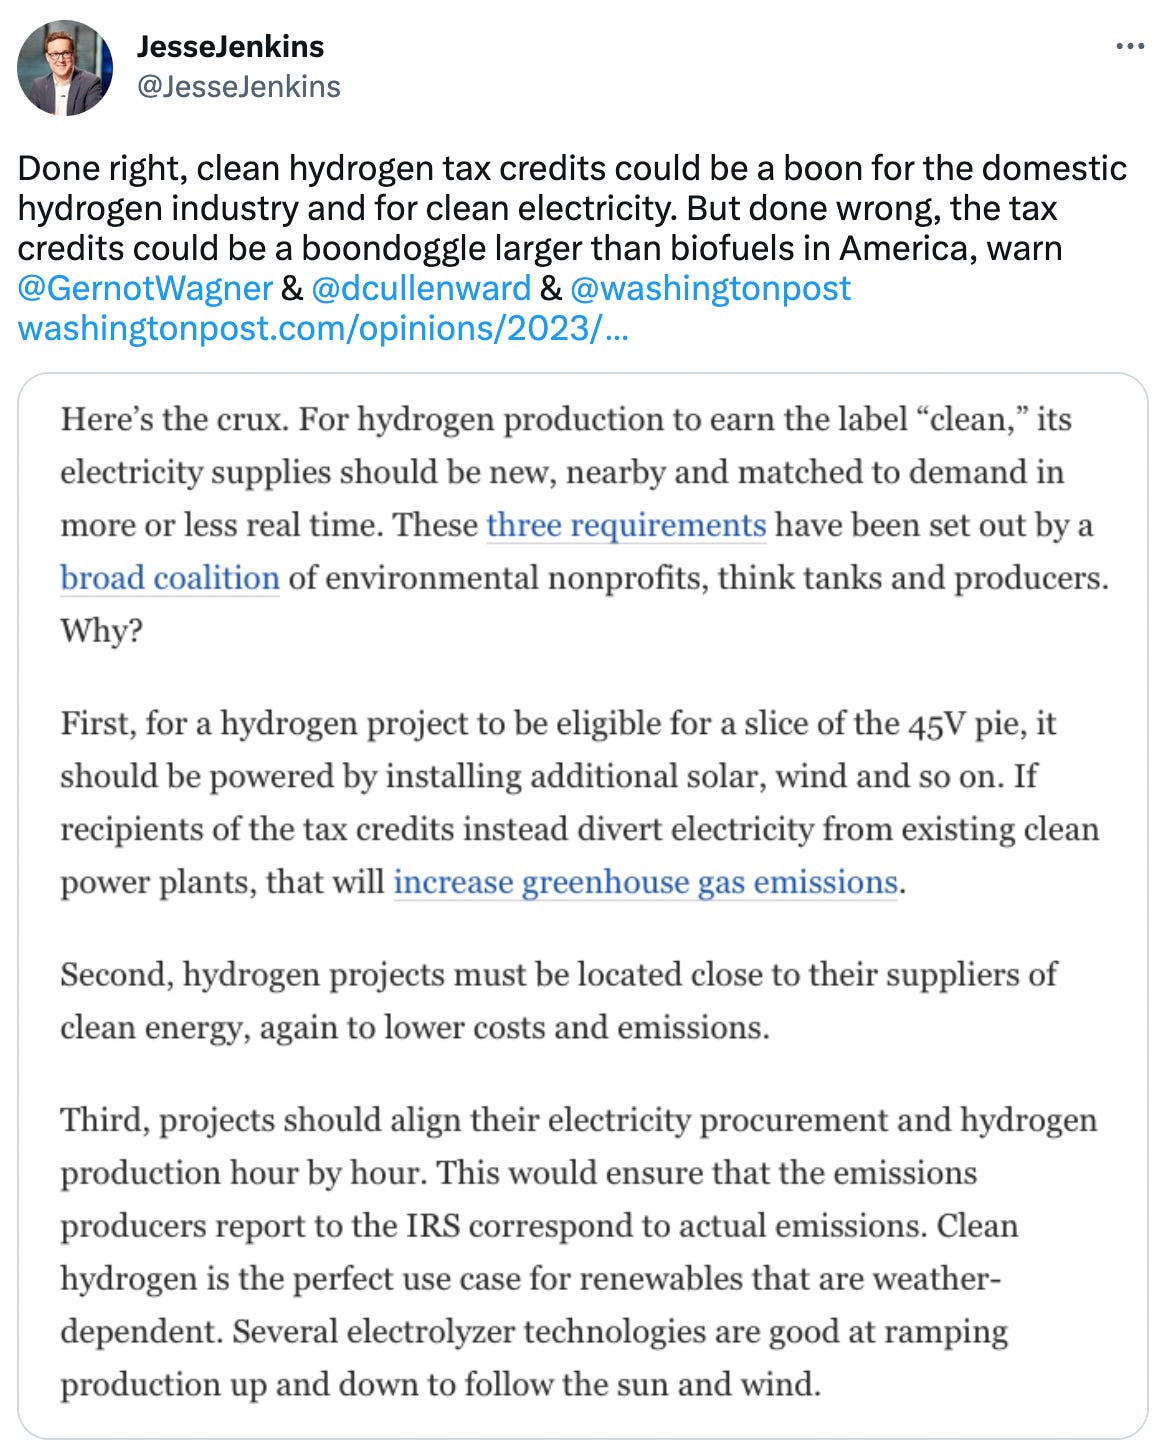  JesseJenkins @JesseJenkins Done right, clean hydrogen tax credits could be a boon for the domestic hydrogen industry and for clean electricity. But done wrong, the tax credits could be a boondoggle larger than biofuels in America, warn  @GernotWagner  &  @dcullenward  &  @washingtonpost  https://washingtonpost.com/opinions/2023/04/27/clean-hydrogen-tax-credit-stringent-rules/